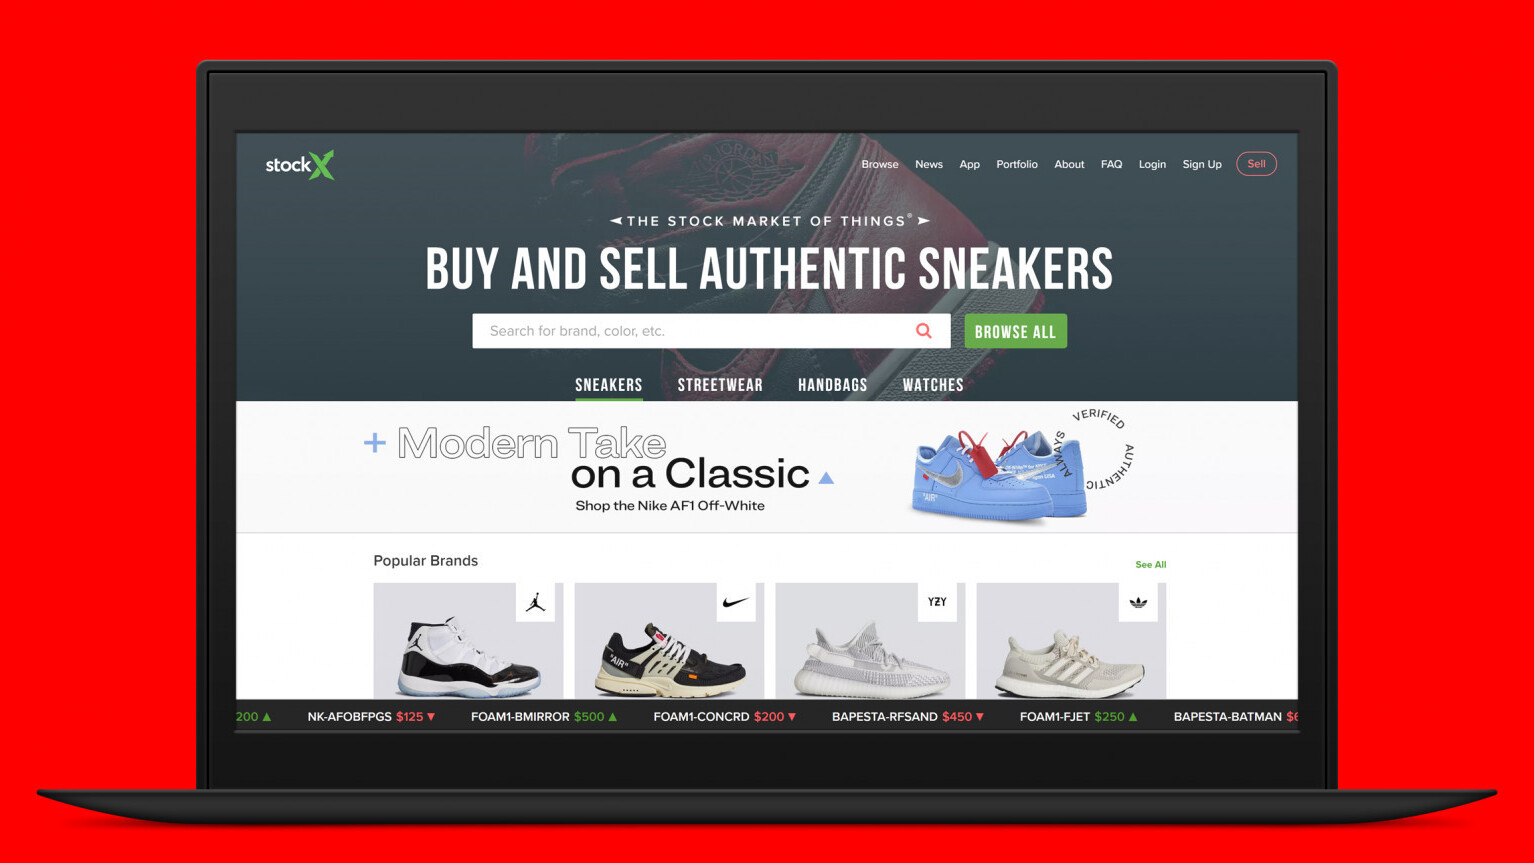 Online sneaker marketplace failed to come clean about 6.8M record data breach